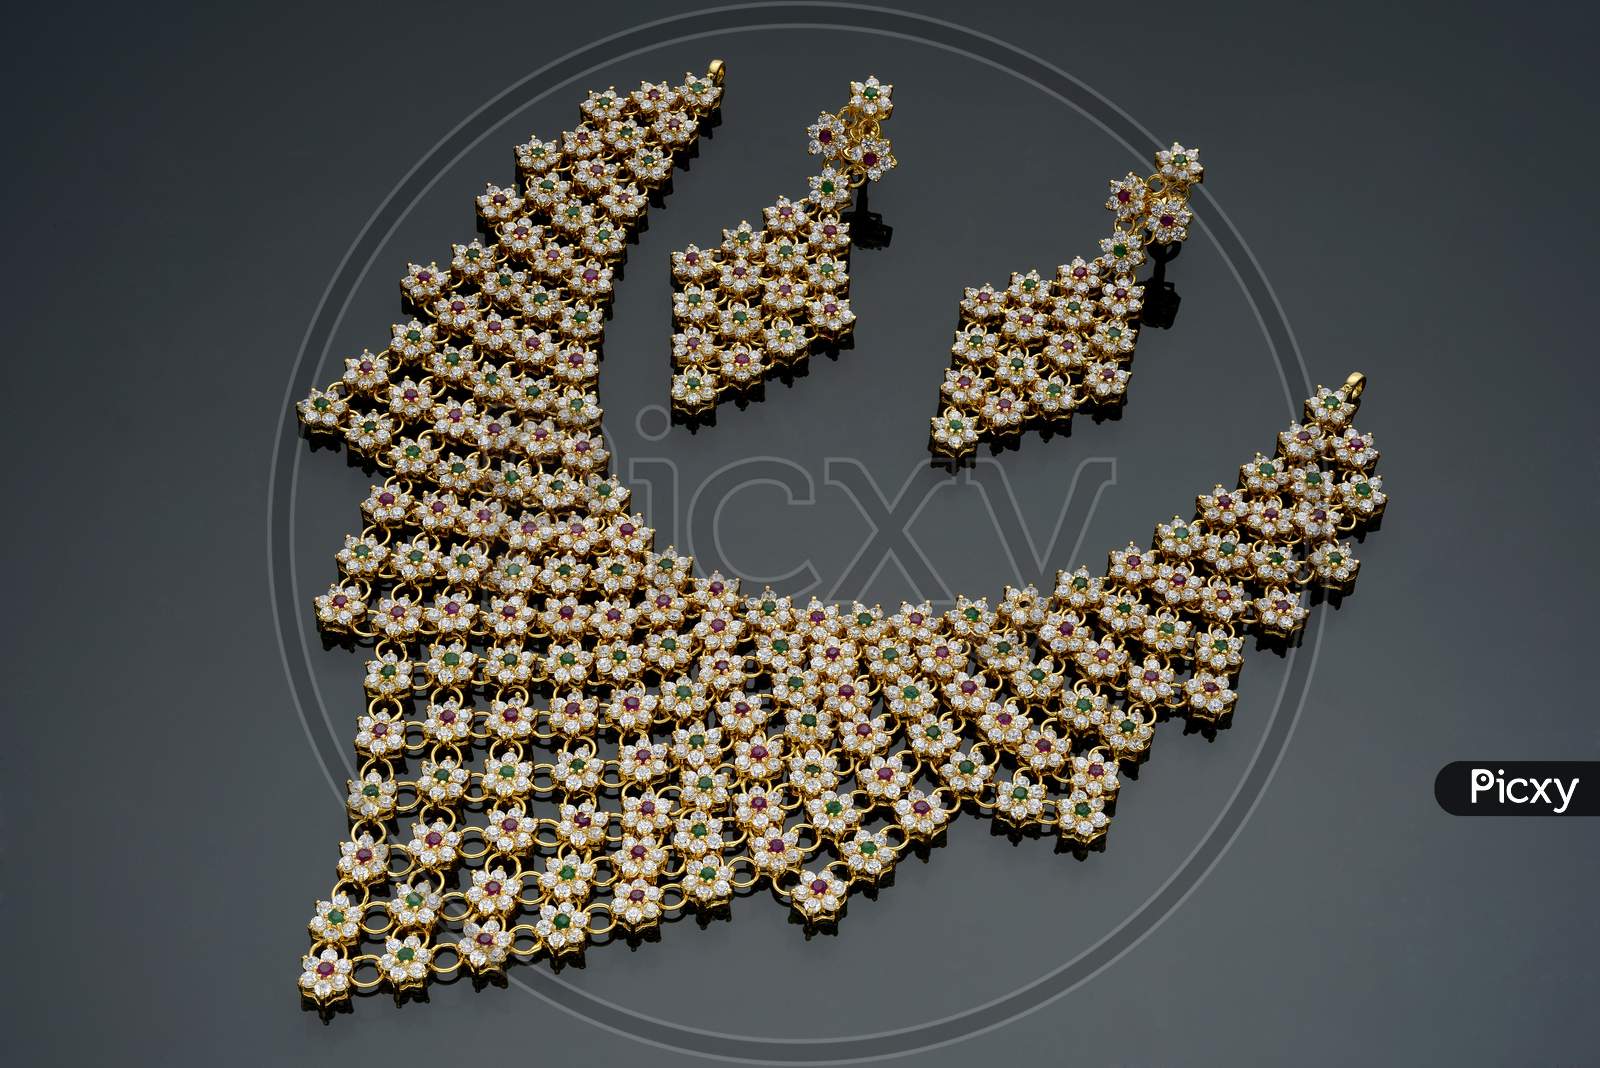 Indian Fancy small gemstone embedded necklace piece on a black background